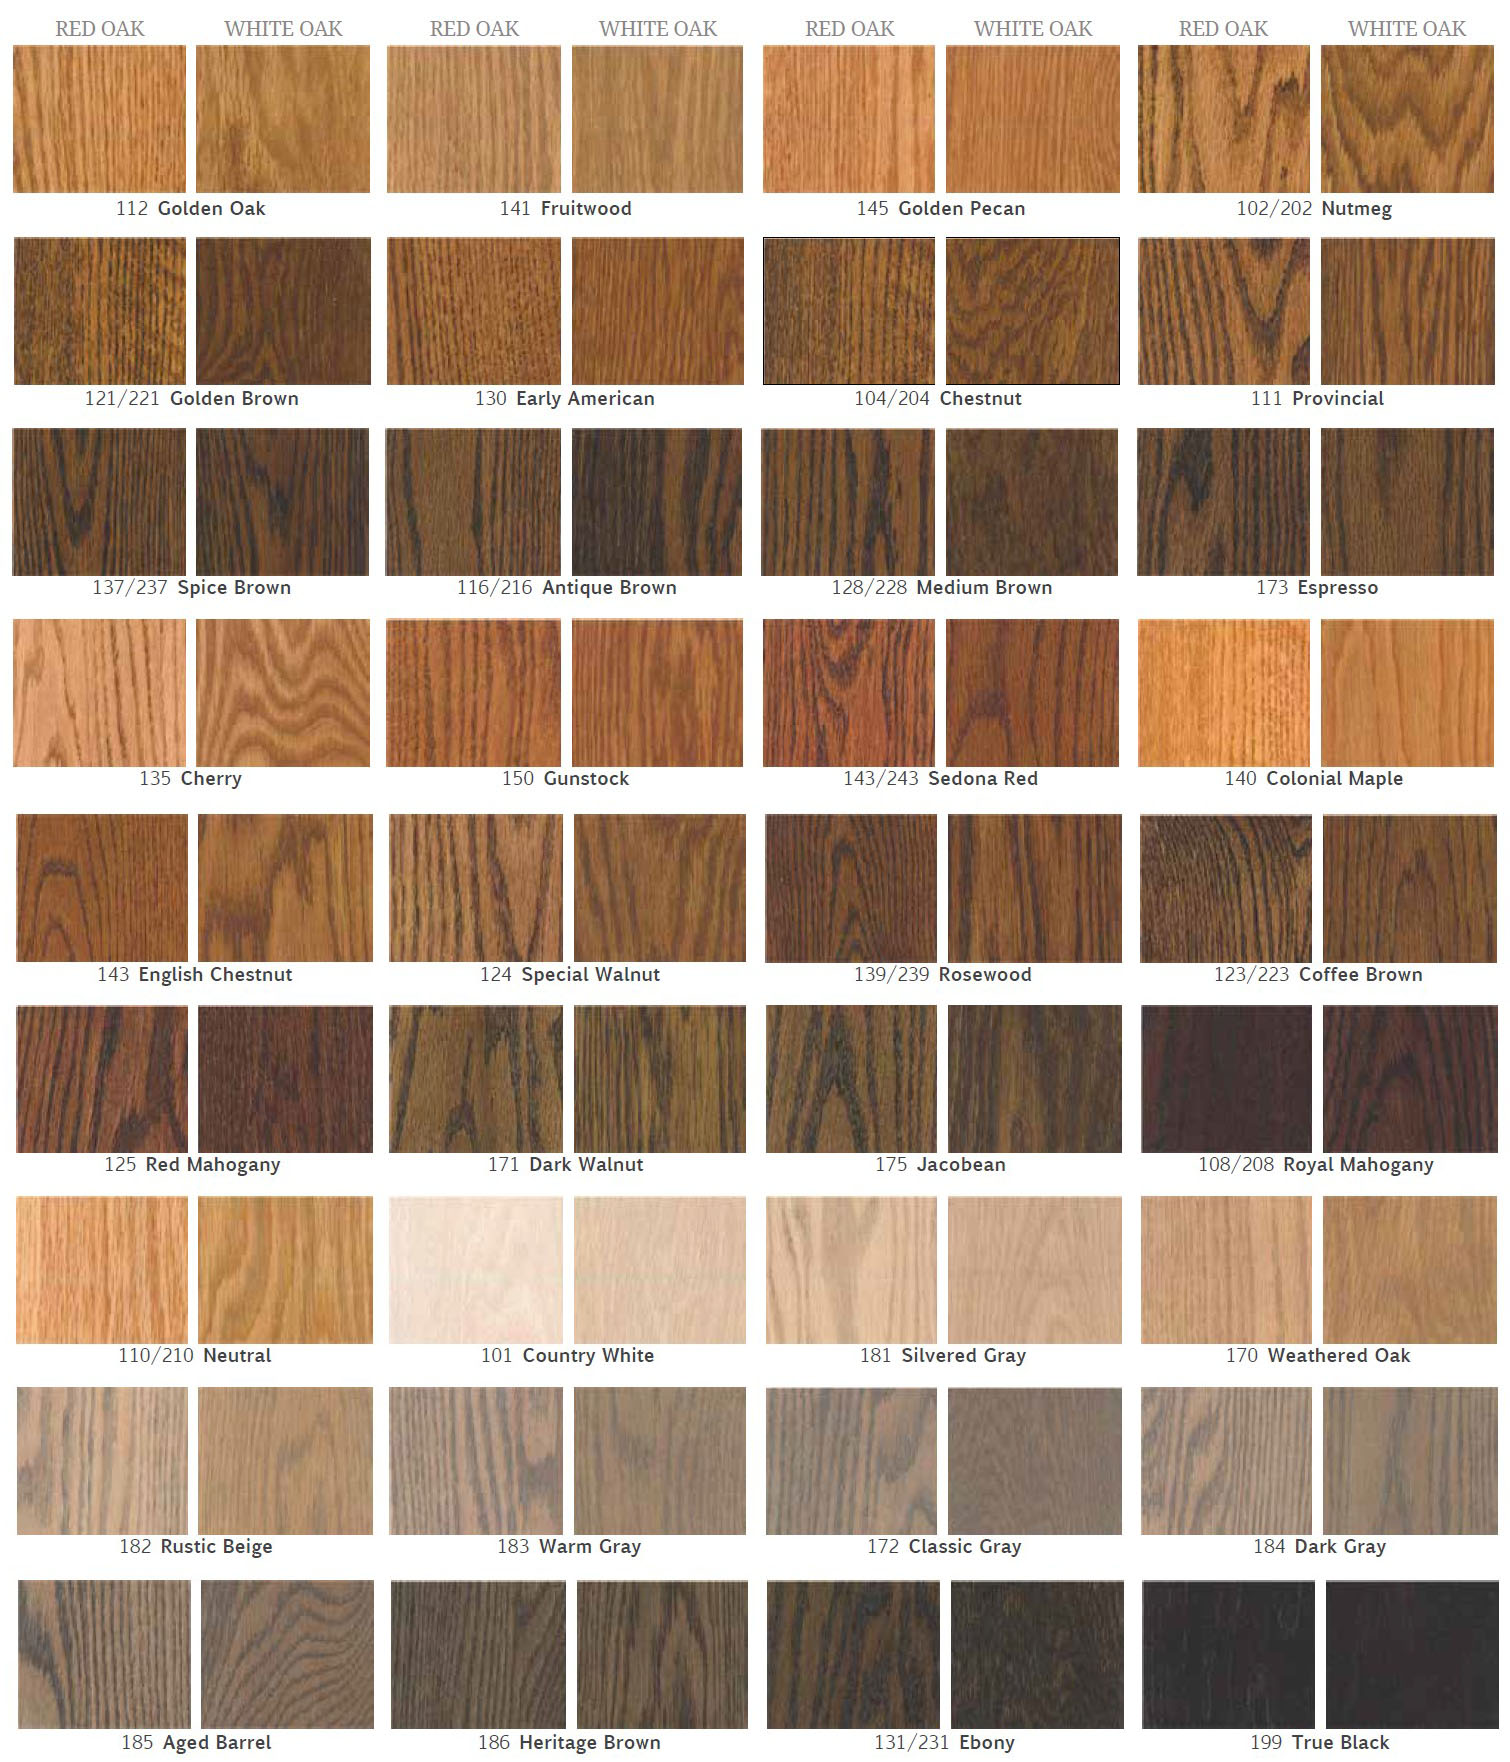 Hardwood flooring stain colors from DuraSeal